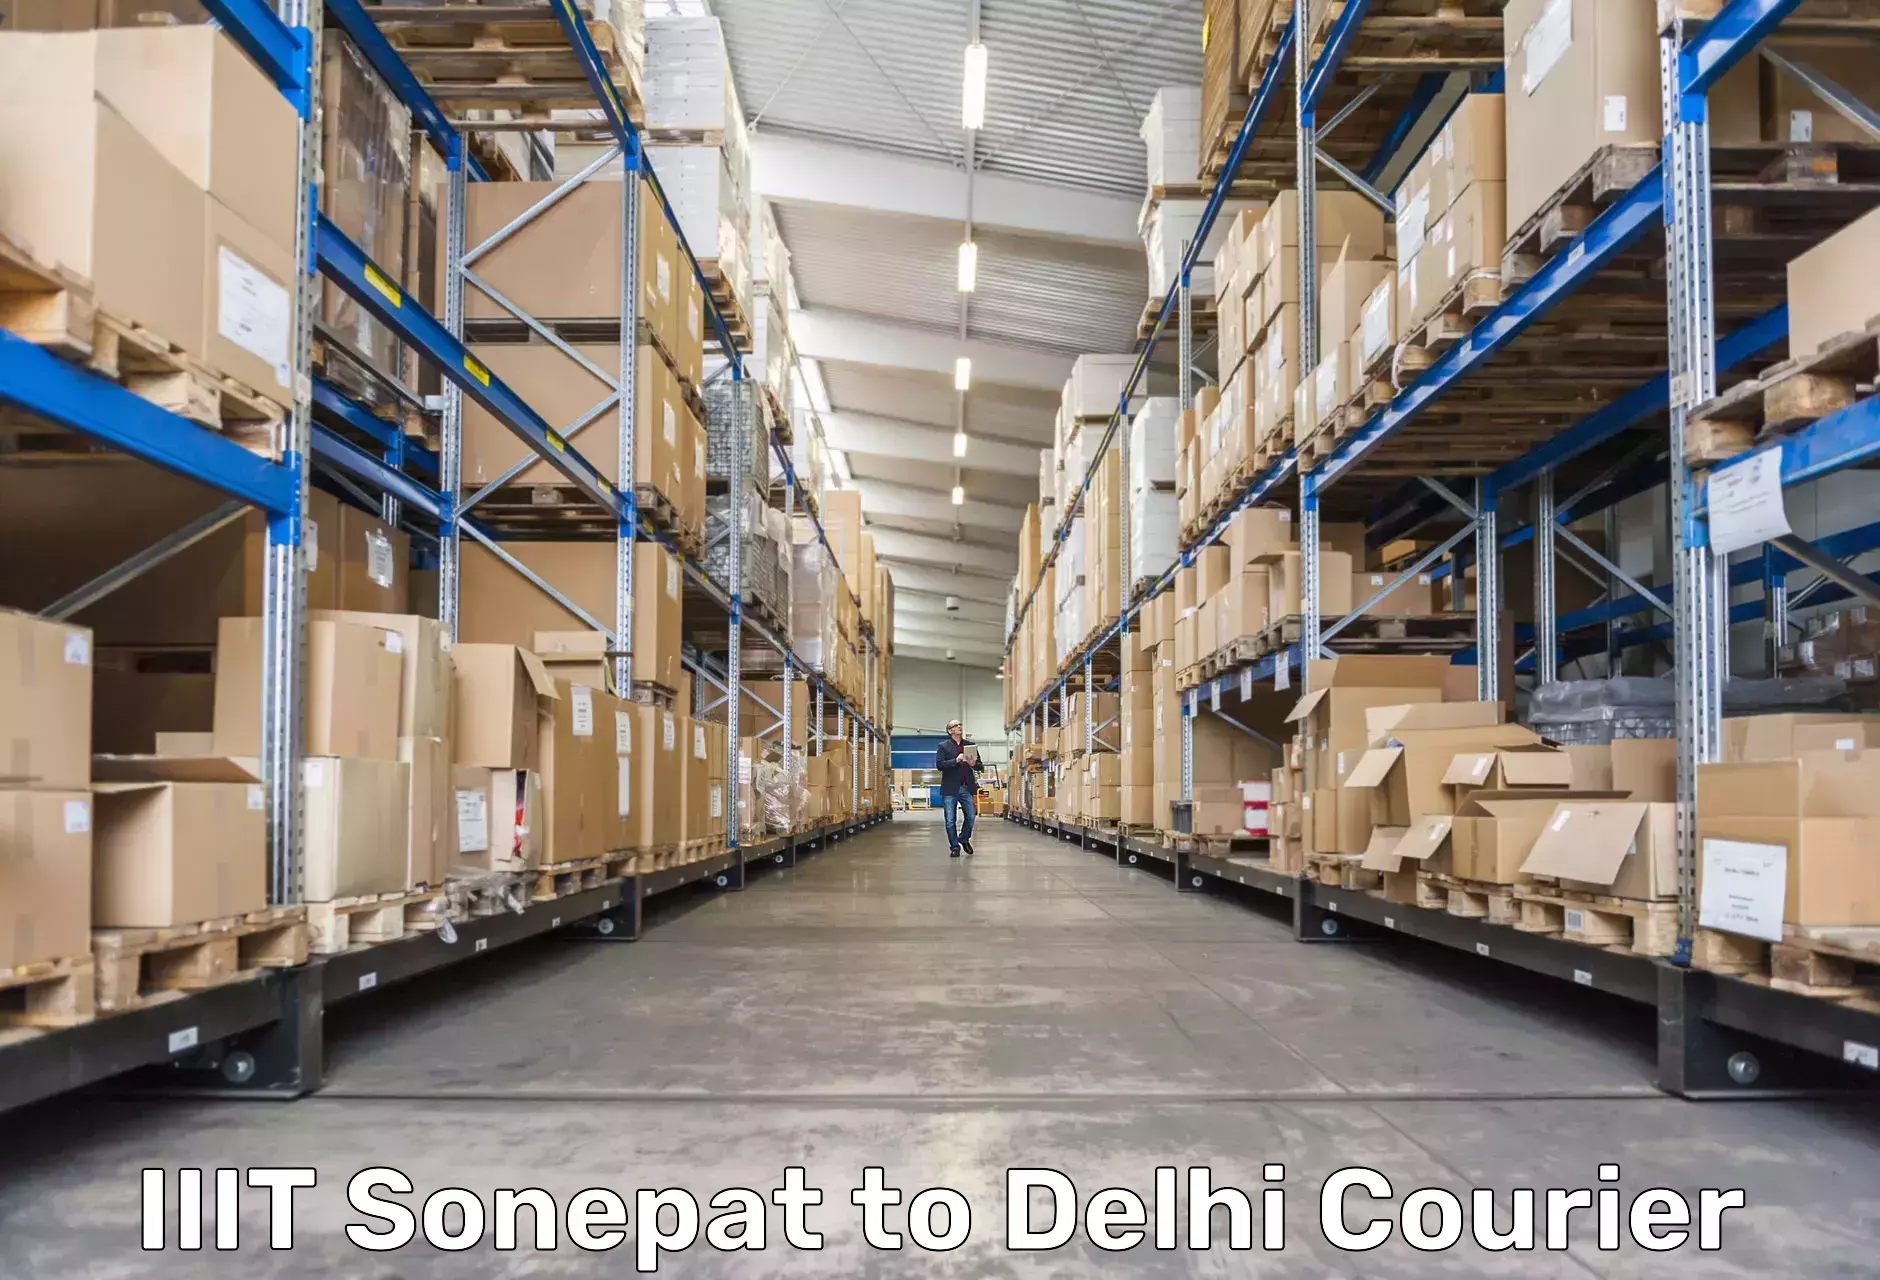 Advanced tracking systems IIIT Sonepat to NCR